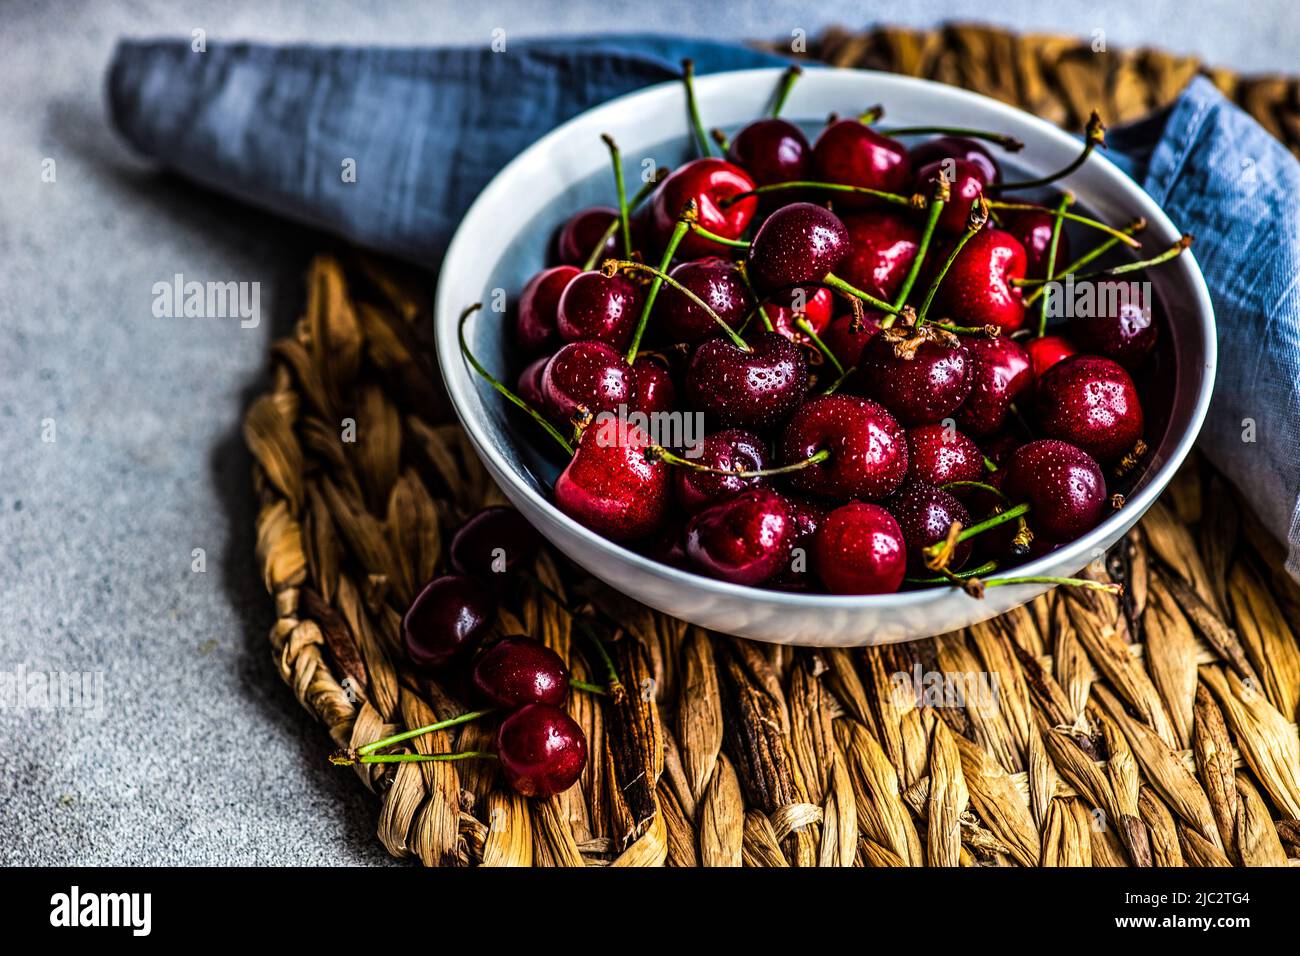 Close-Up of a bowl of organic cherries Stock Photo